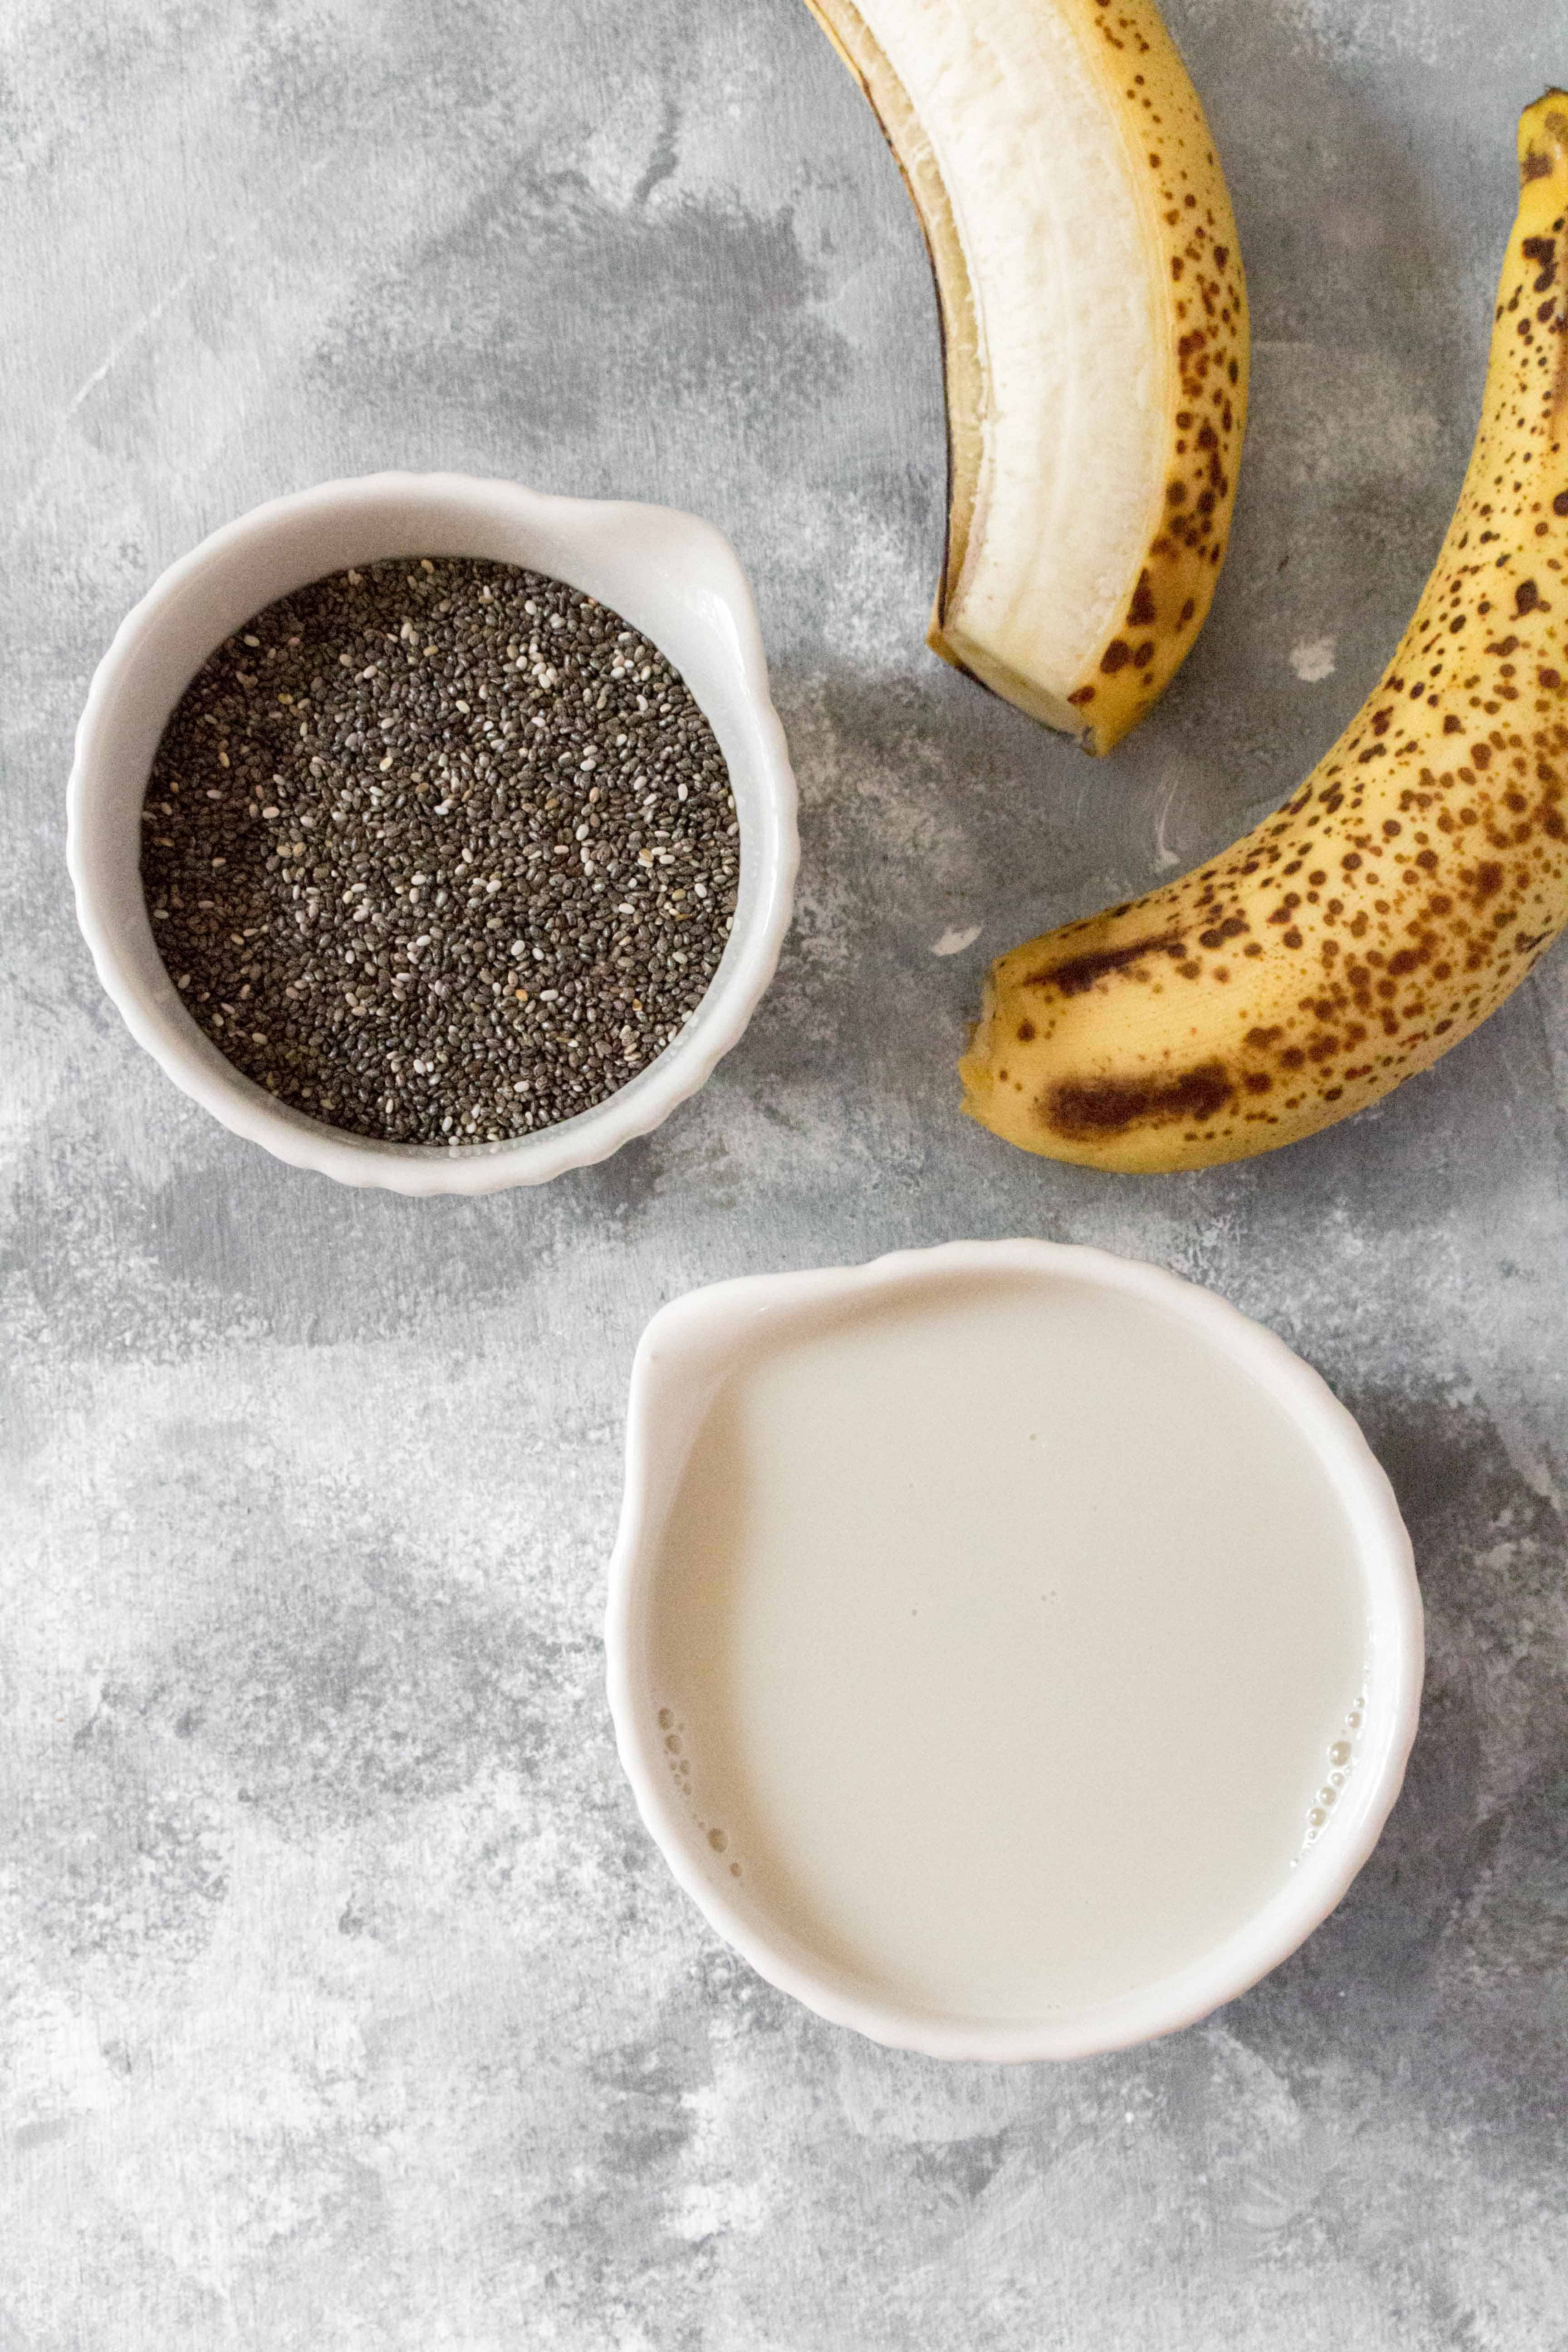 What You'll Need For the Banana Chia Pudding